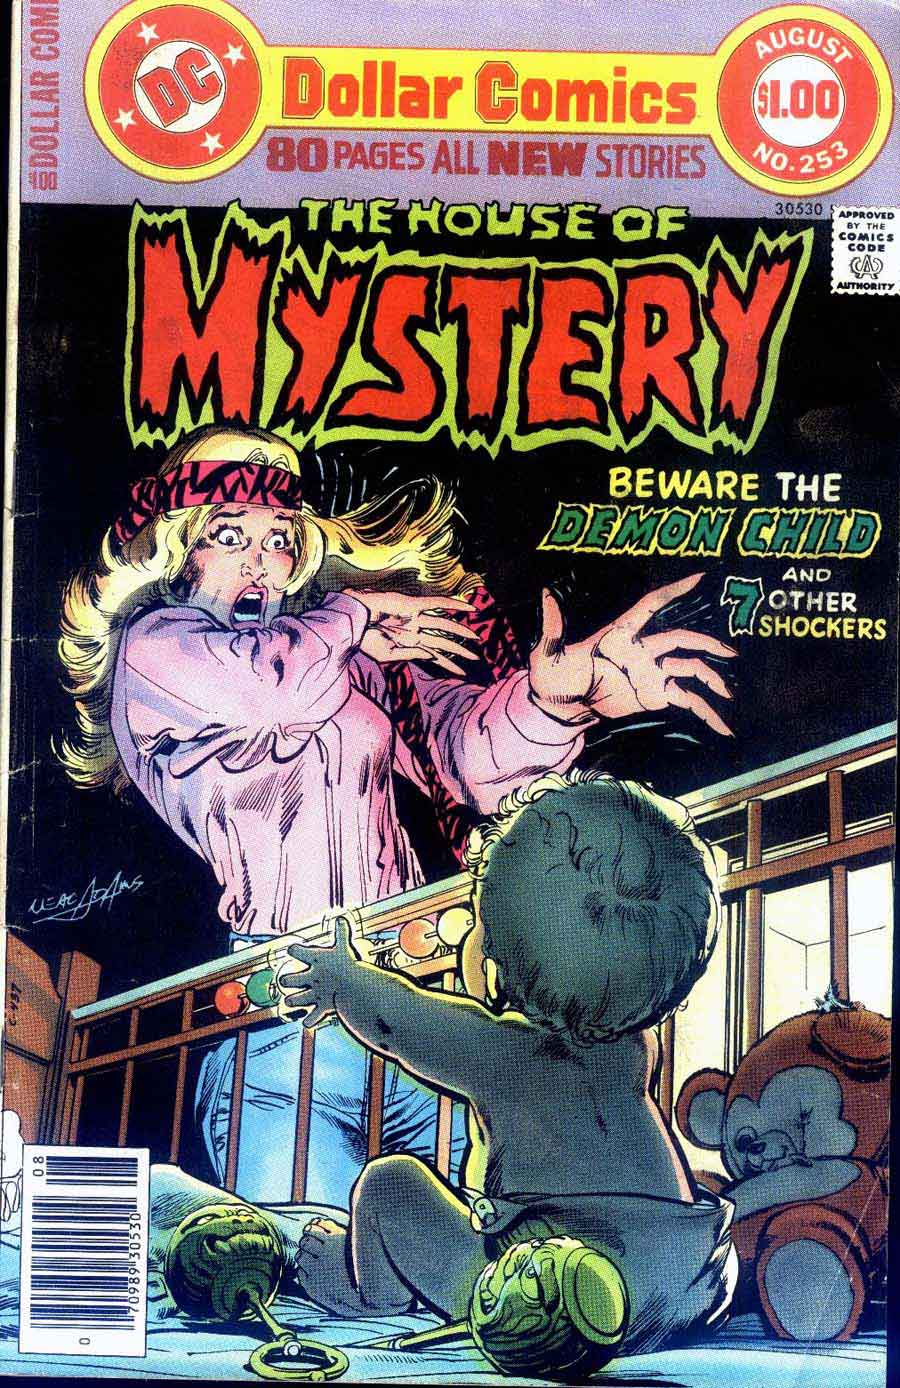 House of Mystery #253 bronze age 1970s dc comic book cover art by Neal Adams